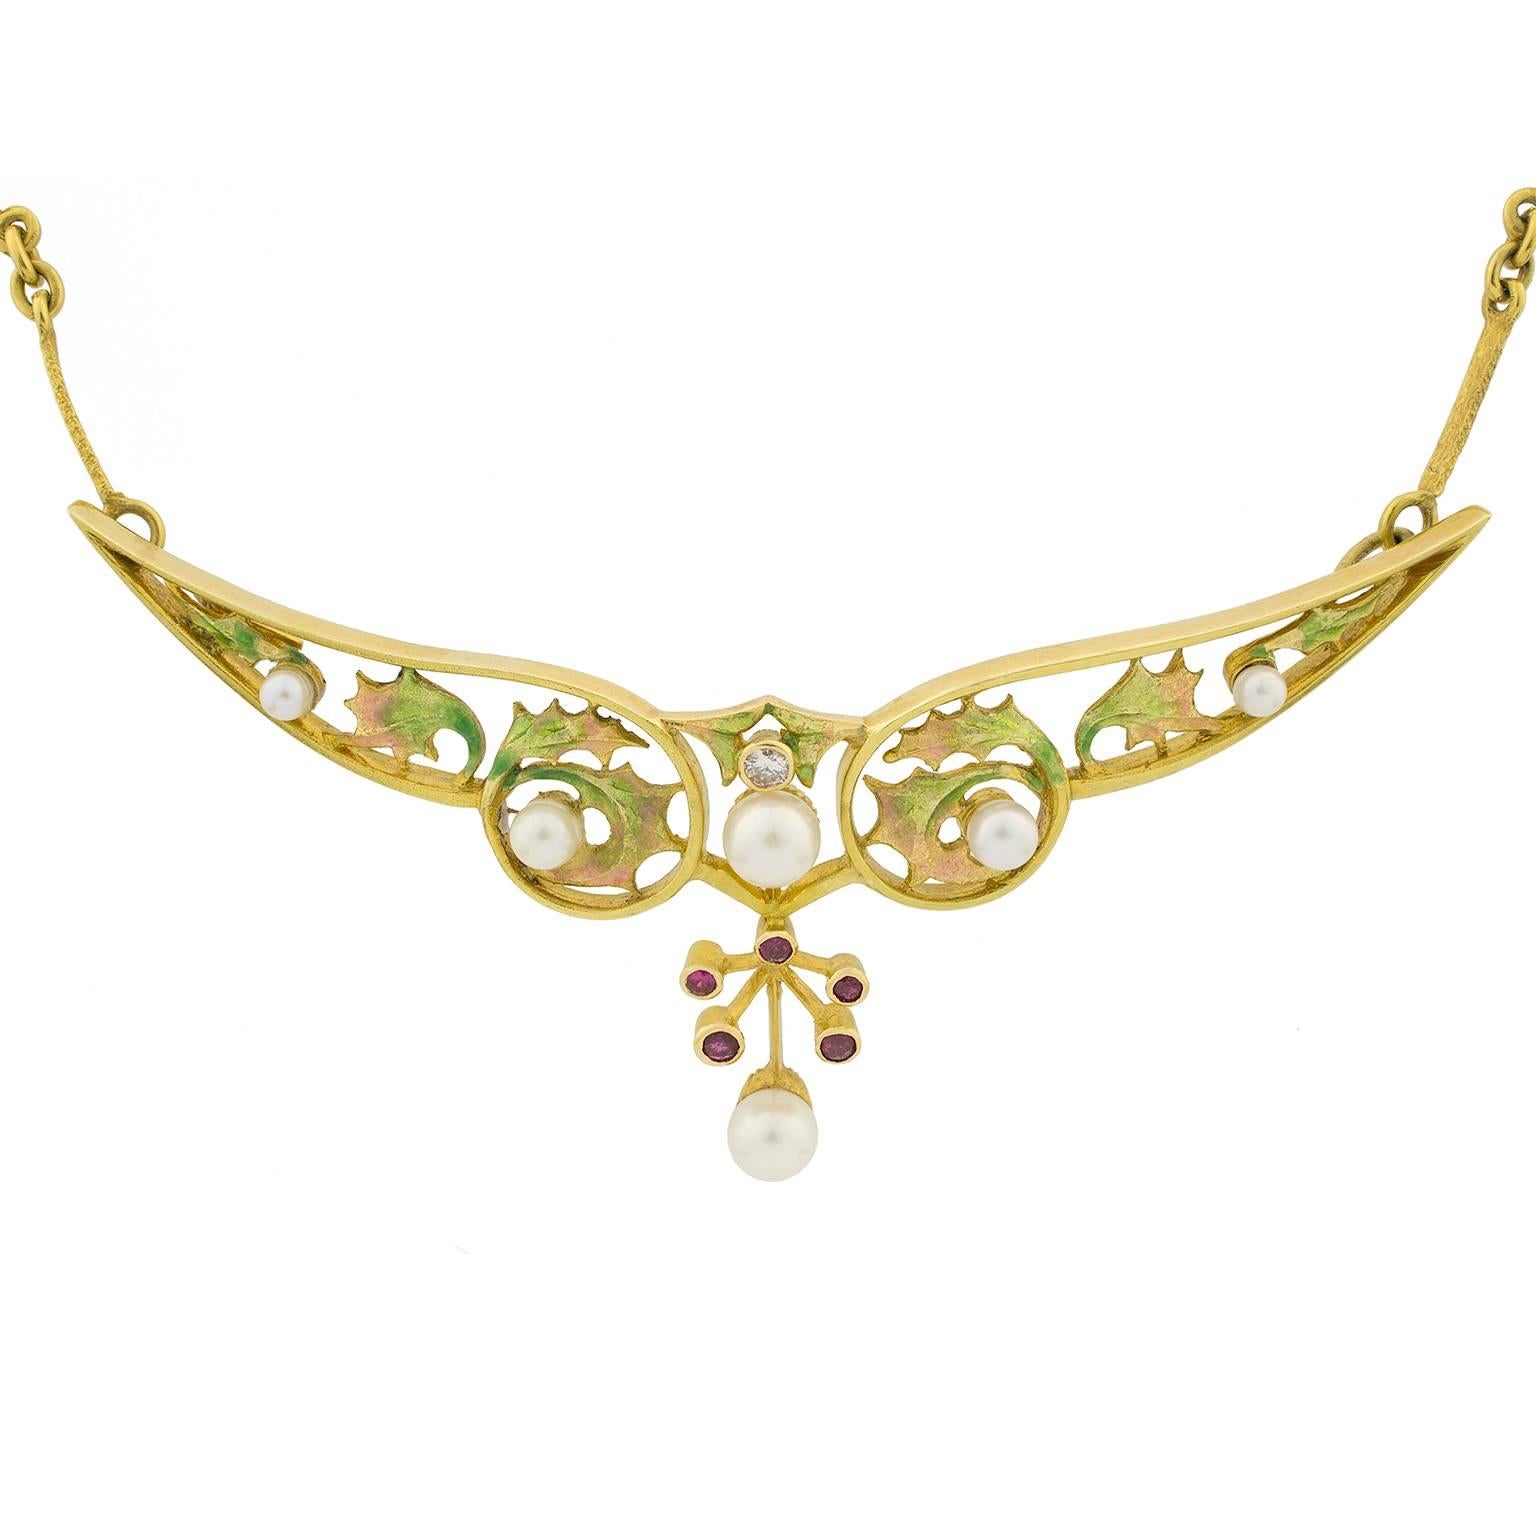 Masriera gold necklace in gold and enamel, set with rubies, pearls and a round brilliant cut diamond.